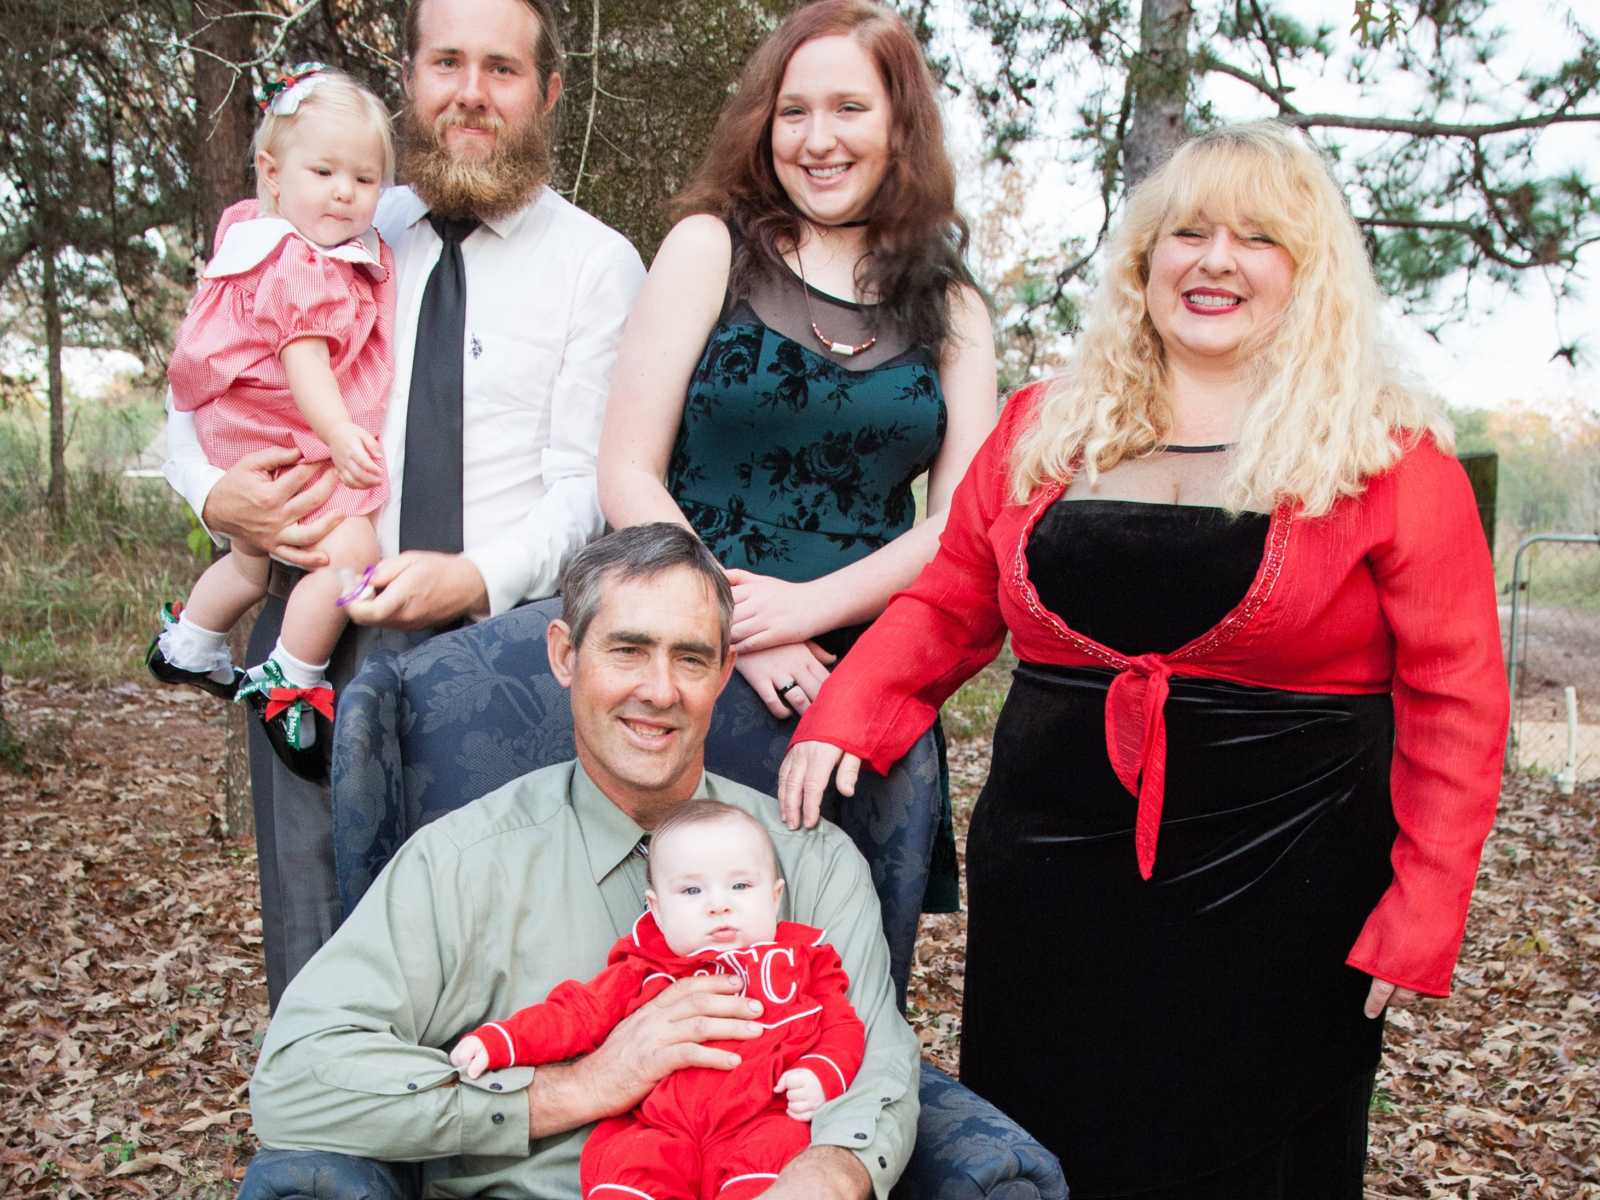 Wife and mother who suffers from diabetes smiles next to family members in the woods